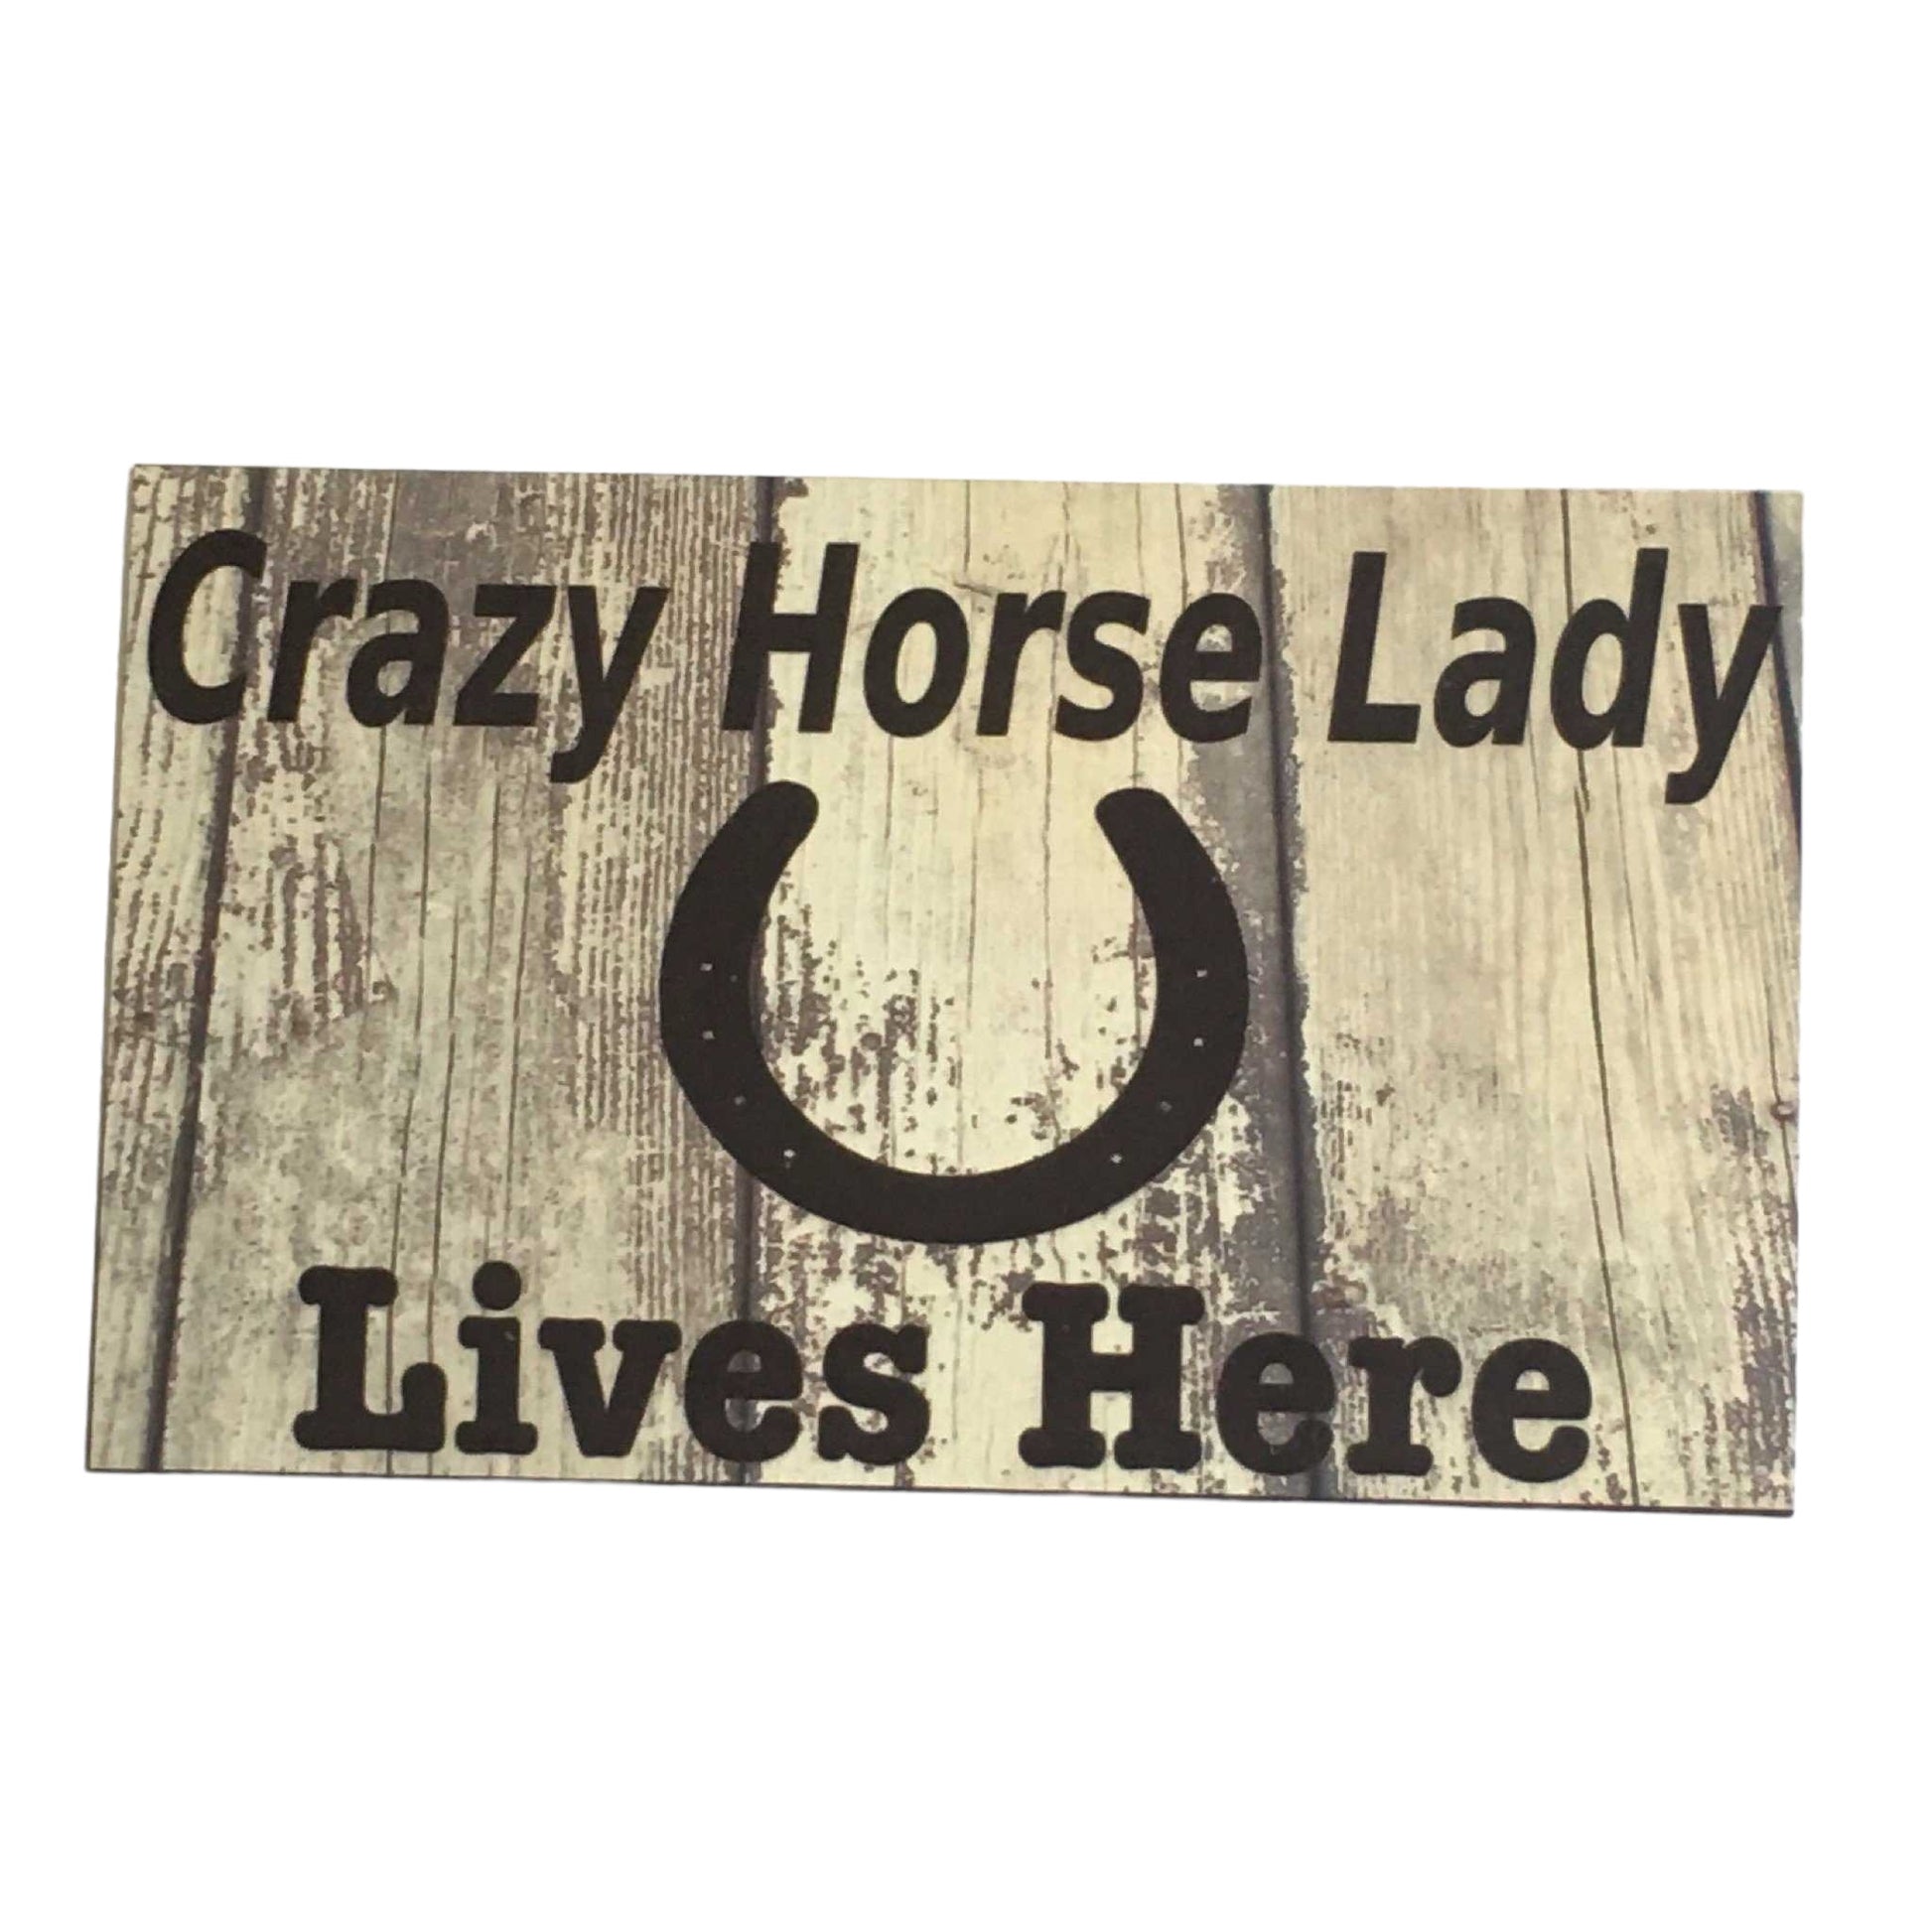 Crazy Horse Lady Lives Here Sign - The Renmy Store Homewares & Gifts 